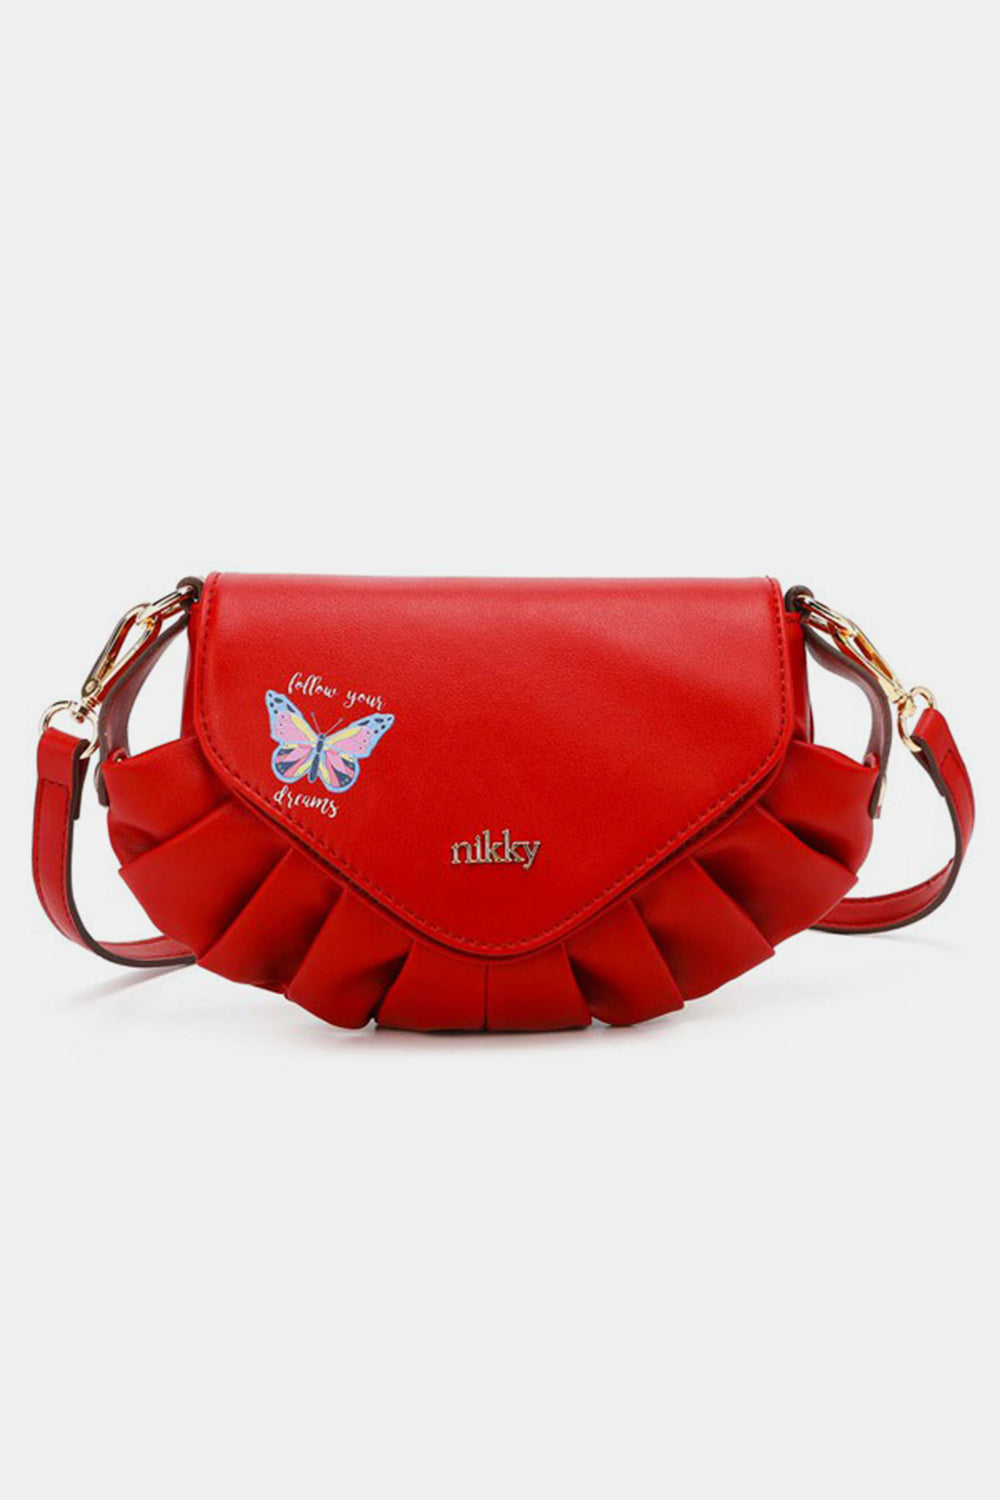 Nicole Lee USA Graphic Crossbody Bag Red One Size 